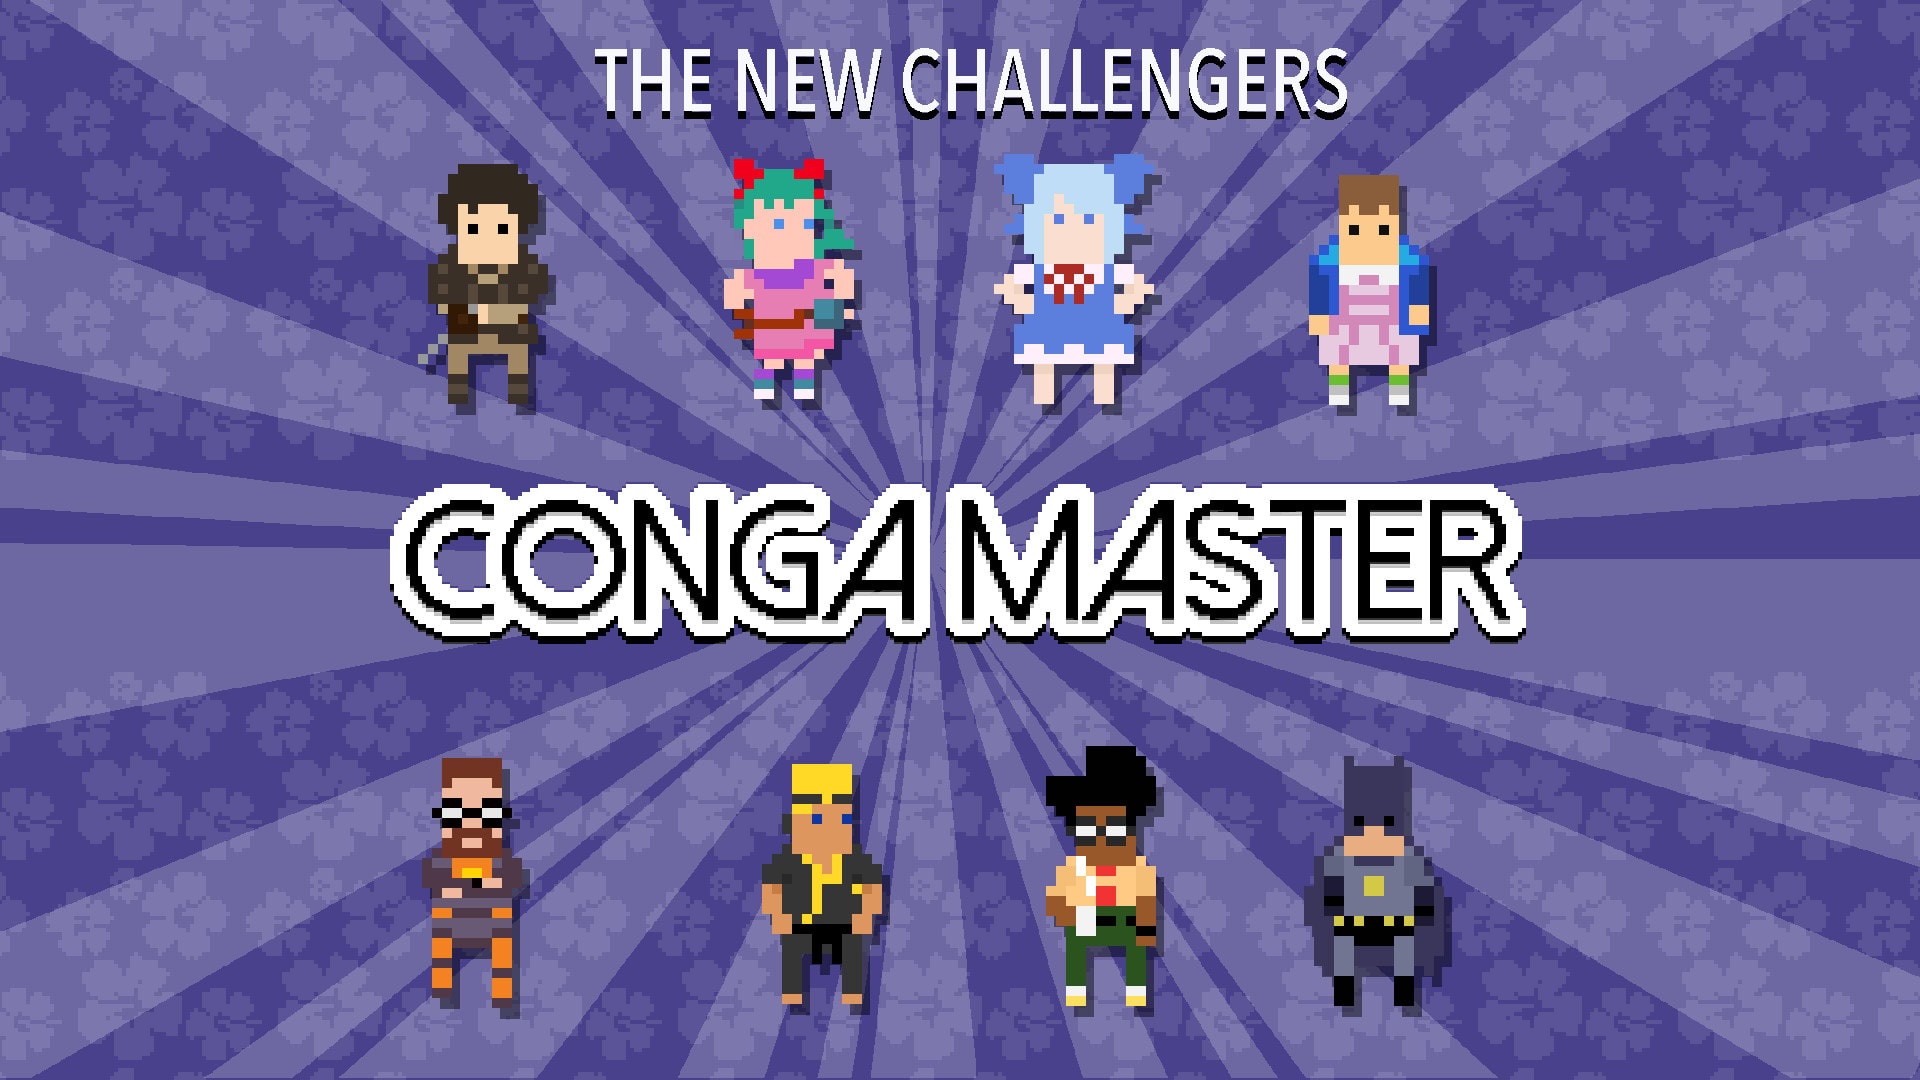 Conga Master: The New Challengers